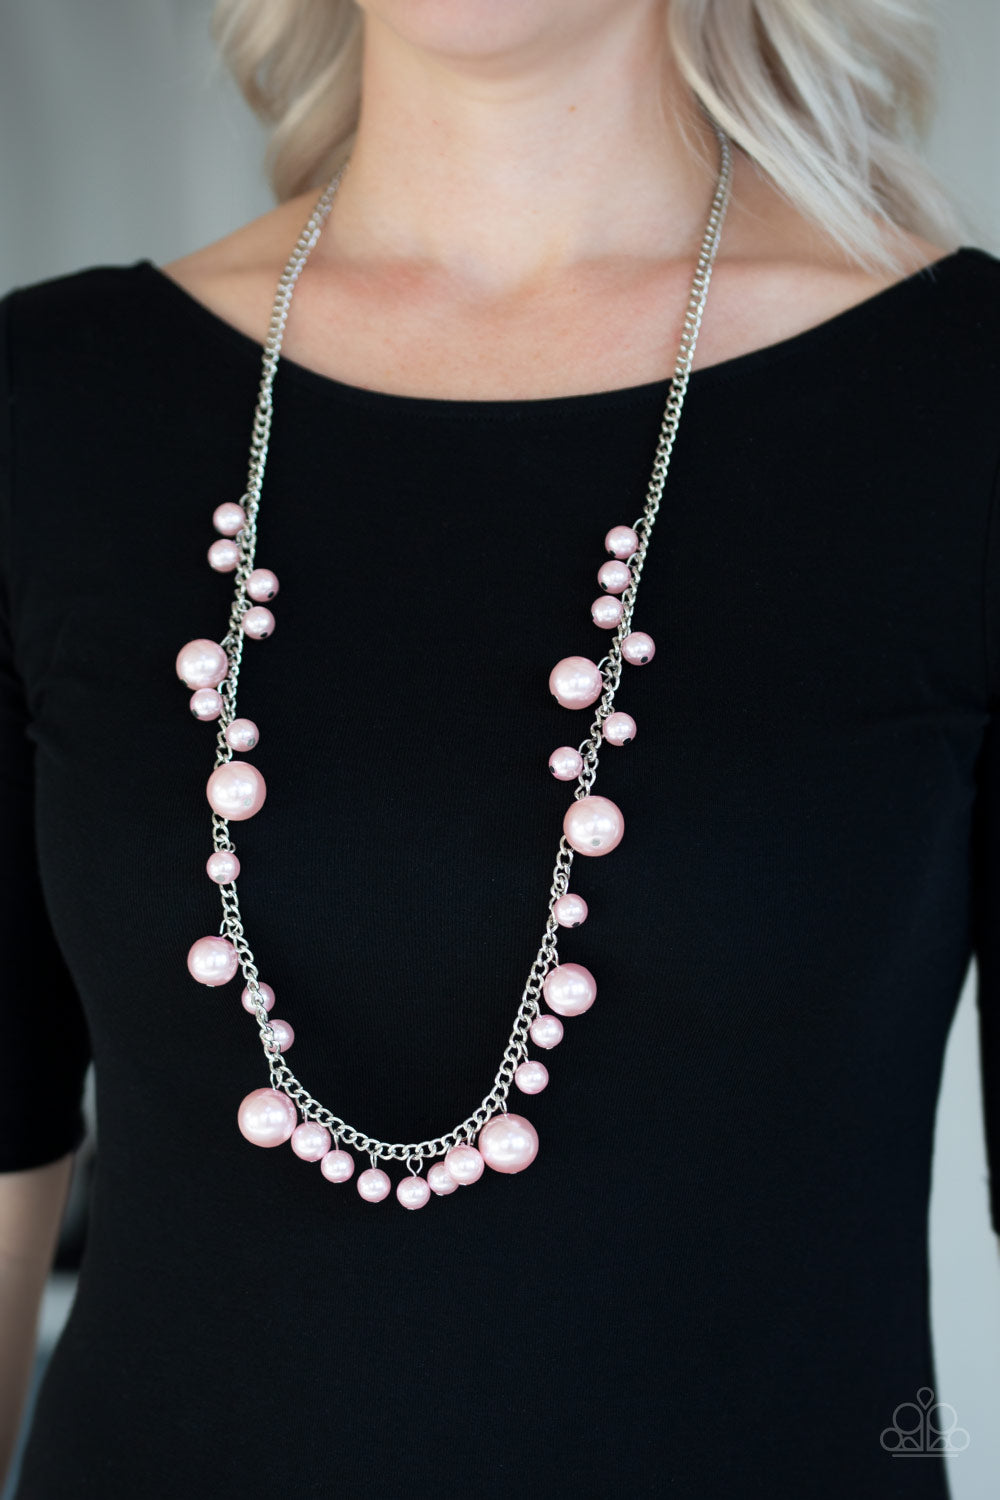 Paparazzi Accessories - Theres Always Room At The Top - Pink & Silver Necklace